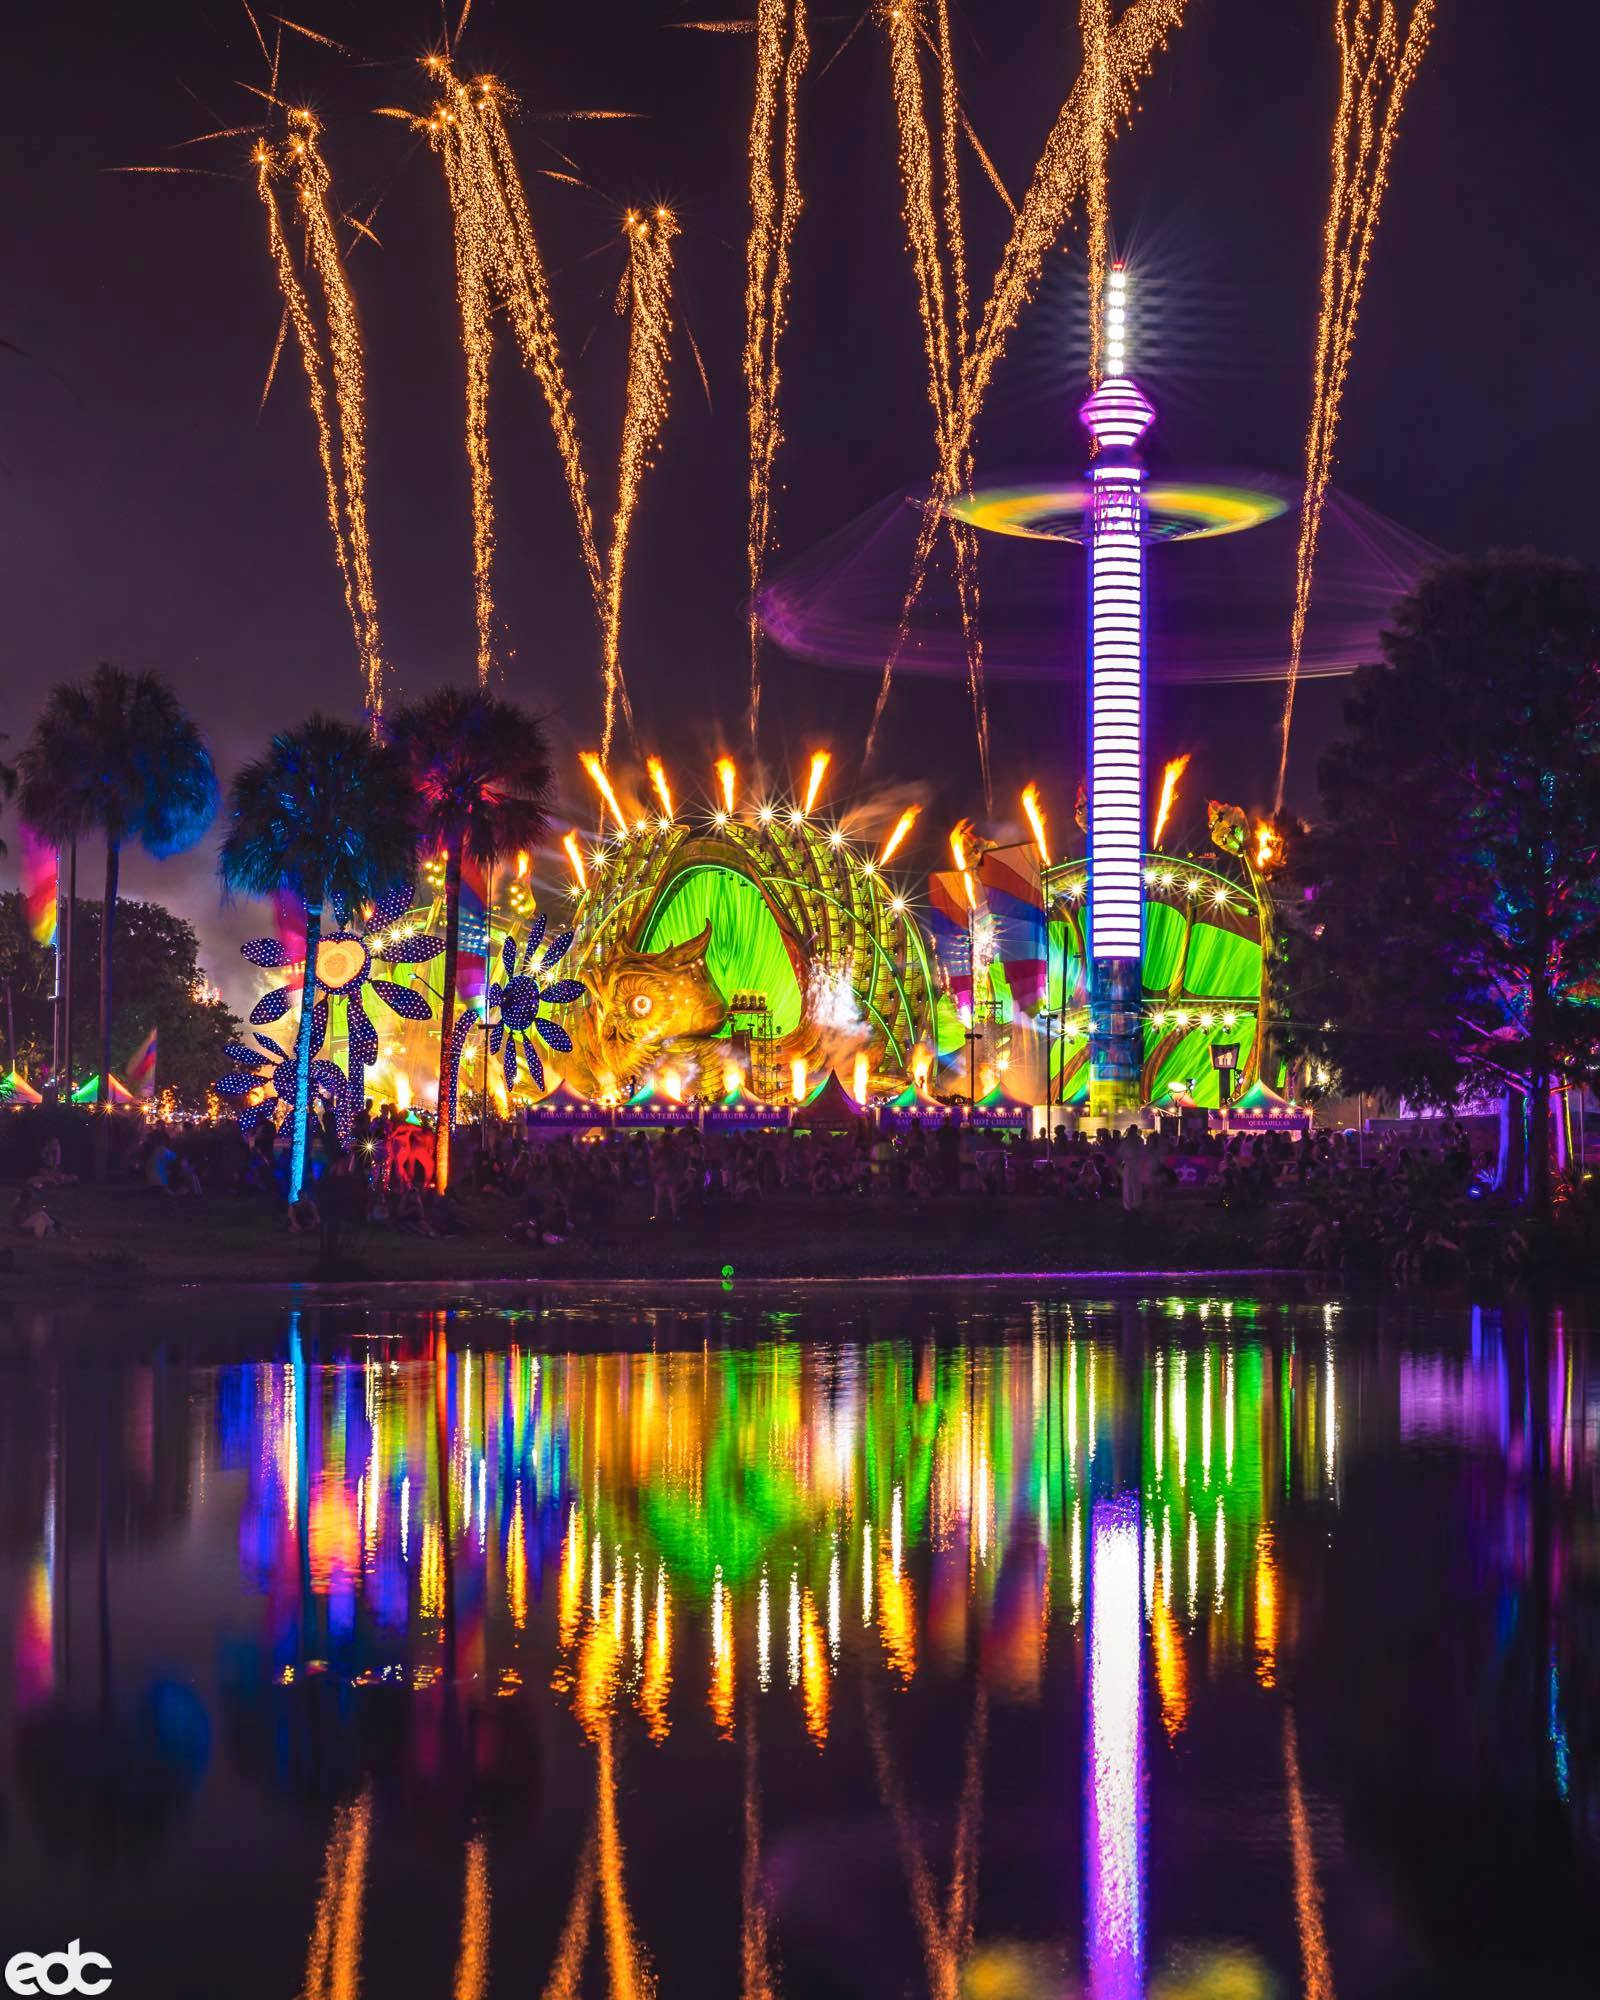 Watch EDC Orlando 2021 special lights, drones, and fireworks shows